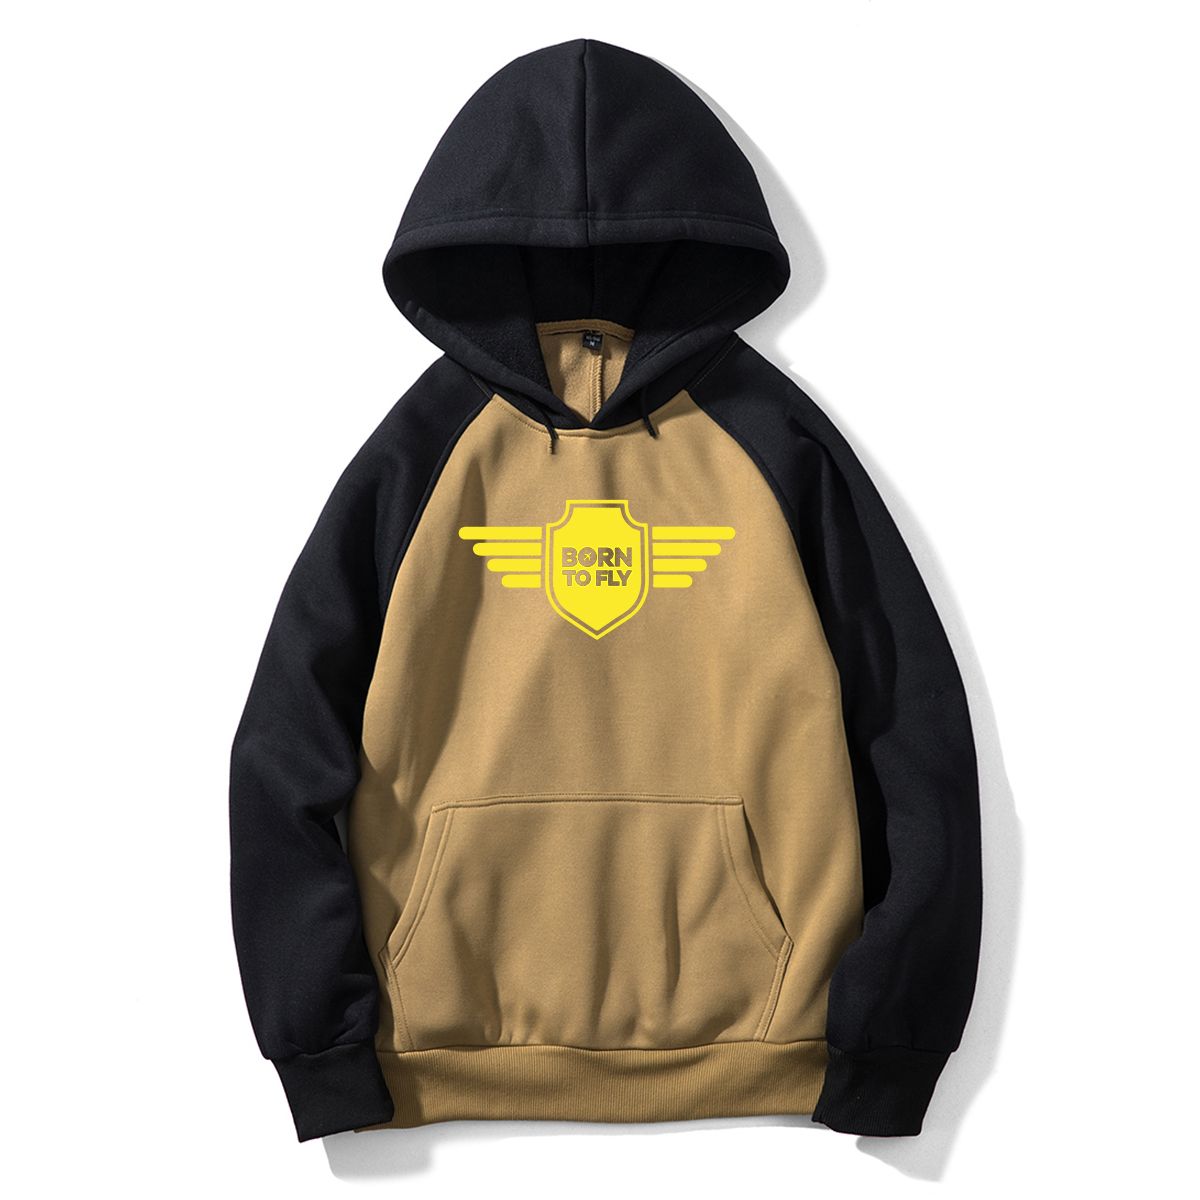 Born To Fly & Badge Designed Colourful Hoodies